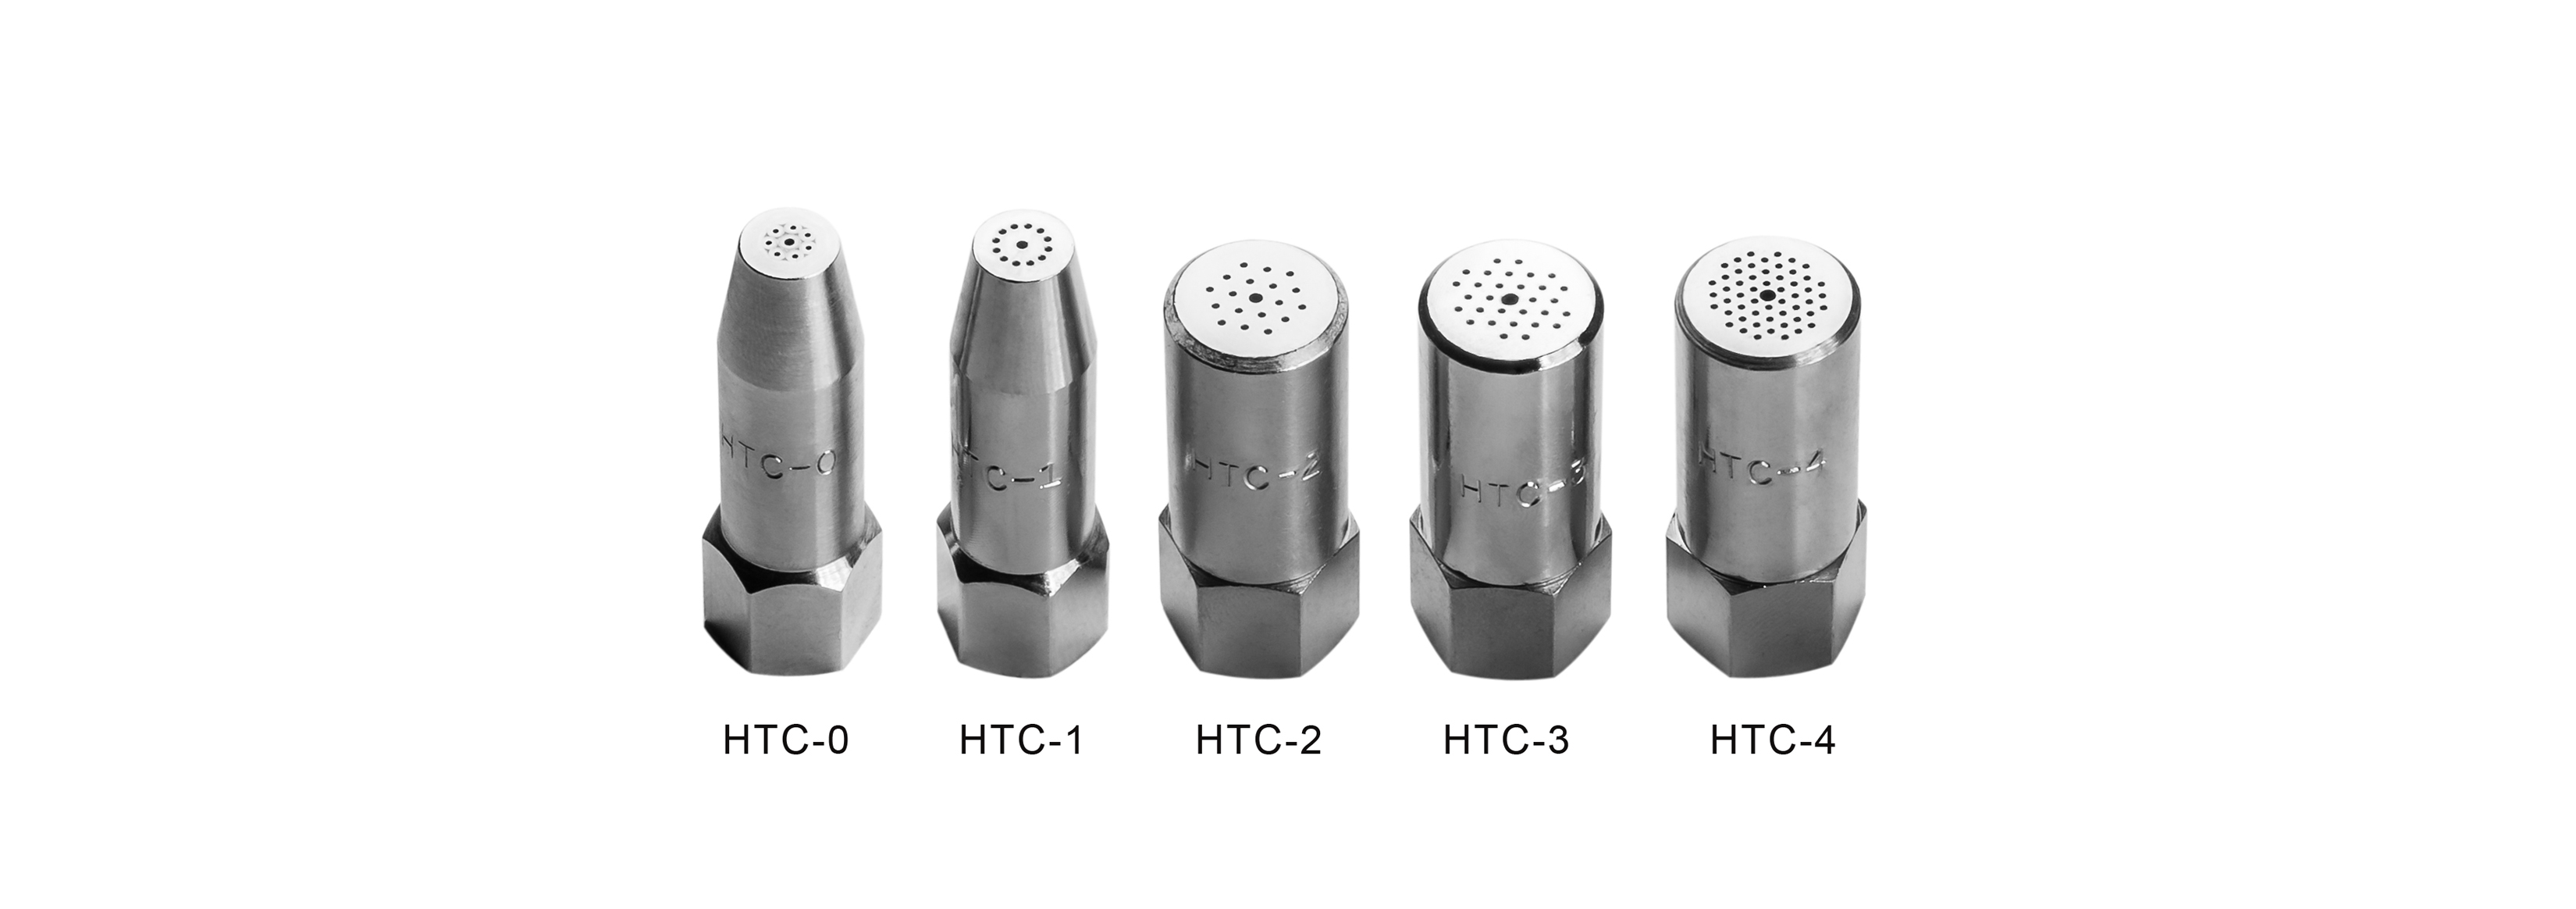 Snooze Th lotus HTC Series Tips – nationaltorch